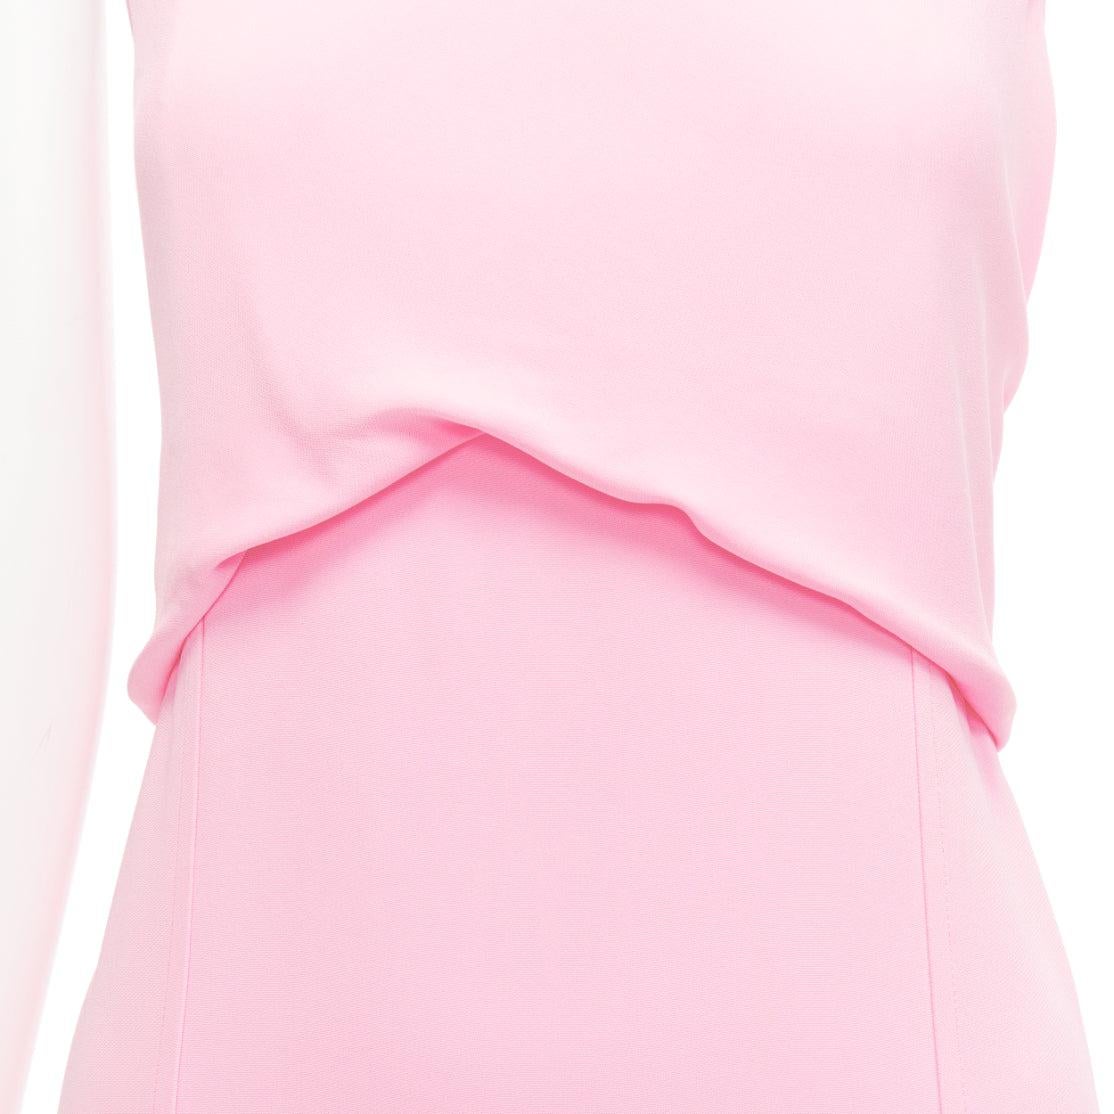 VICTORIA BECKHAM pink silky drape front ruched back sleeveless shift dress For Sale 3